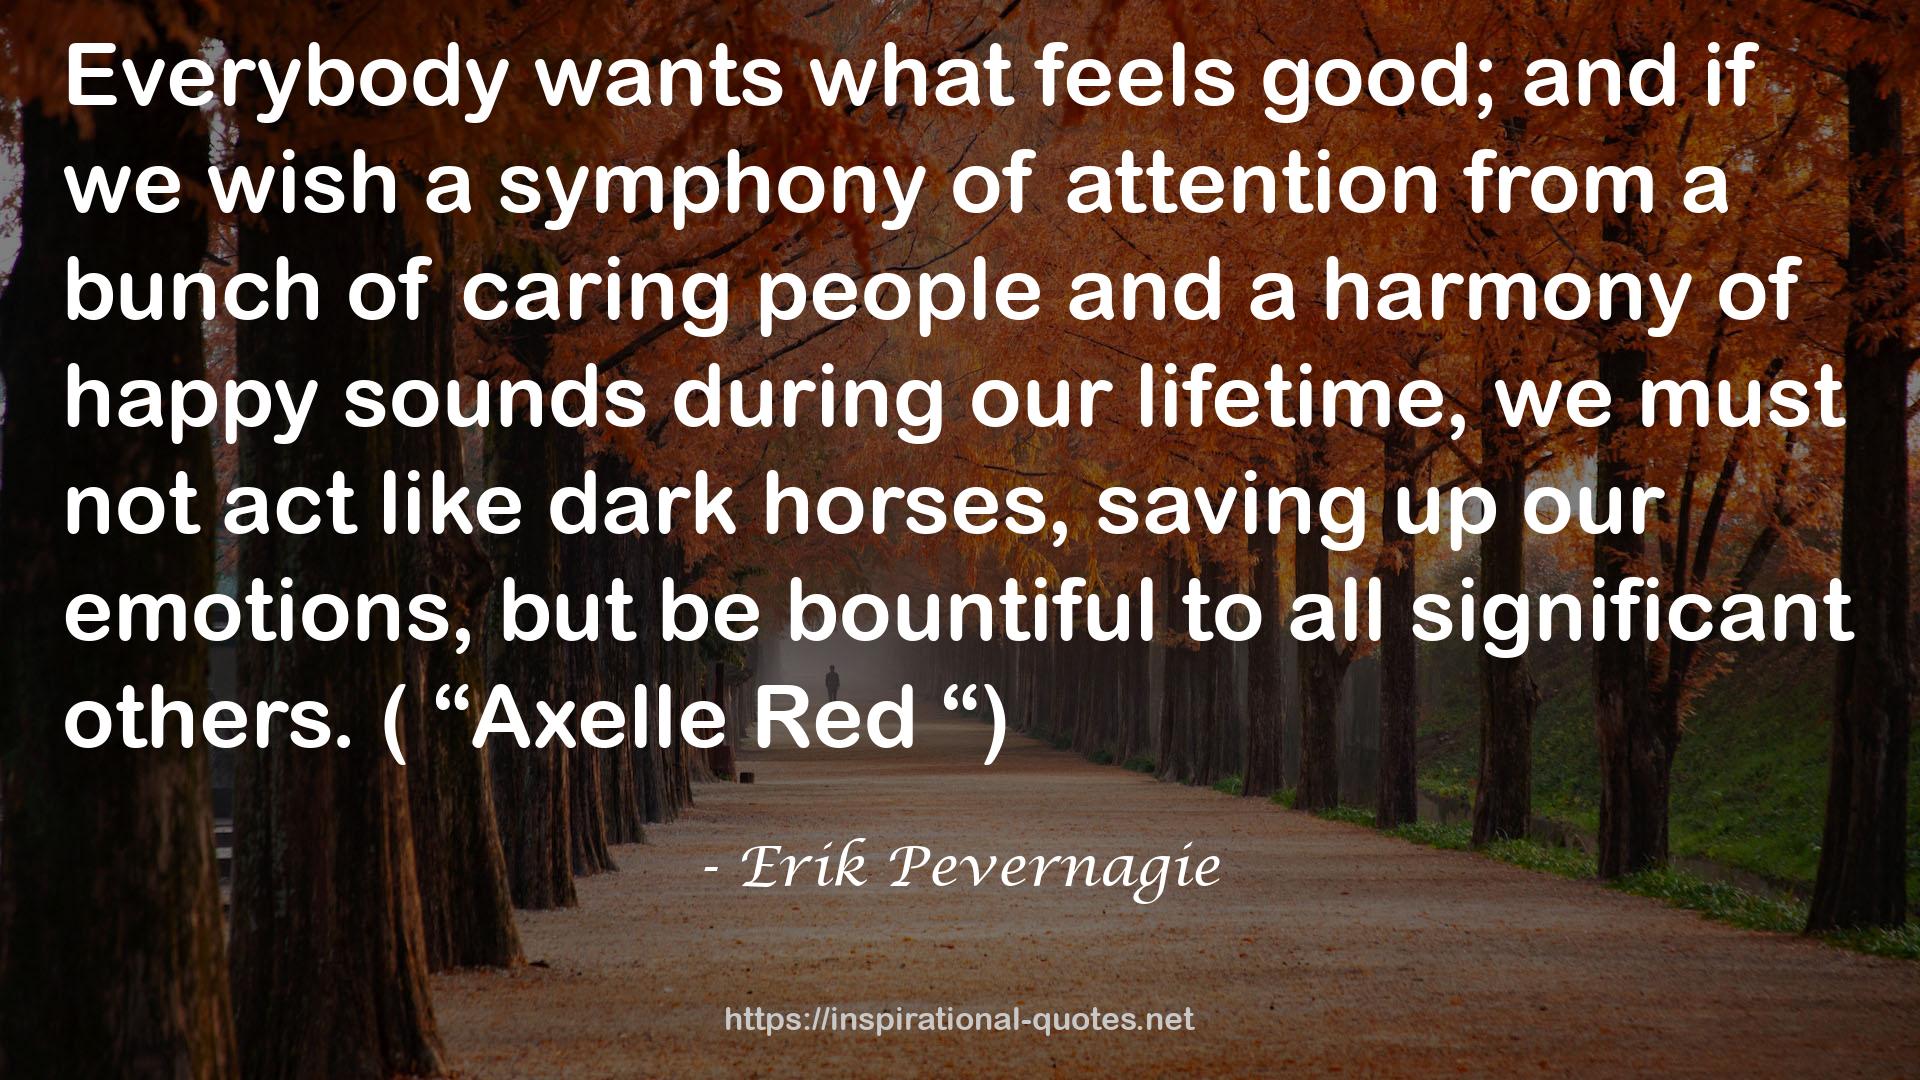 ( “Axelle Red  QUOTES